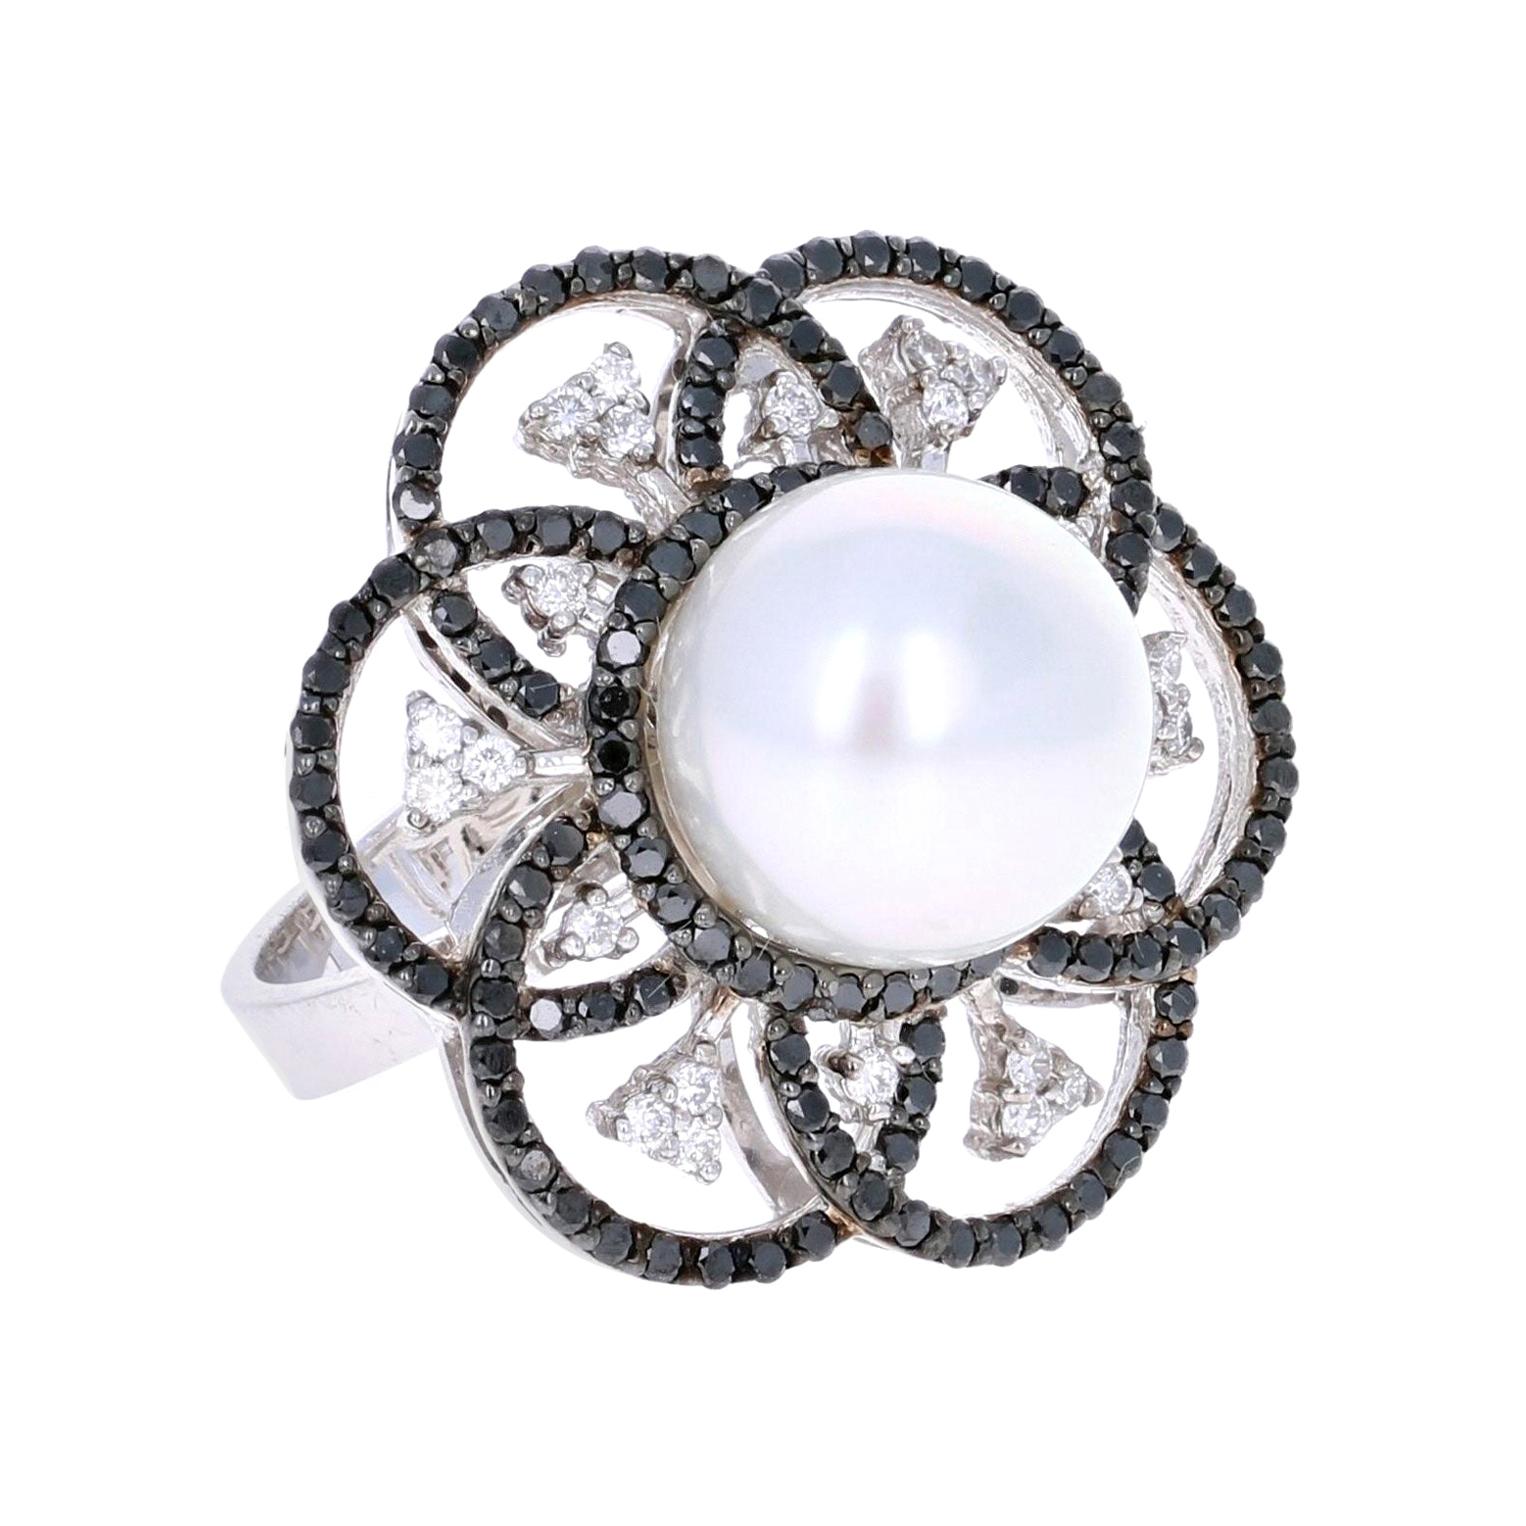 1.31 Carat South Sea Pearl Black Diamond Cocktail Ring in 14 Karat White Gold For Sale